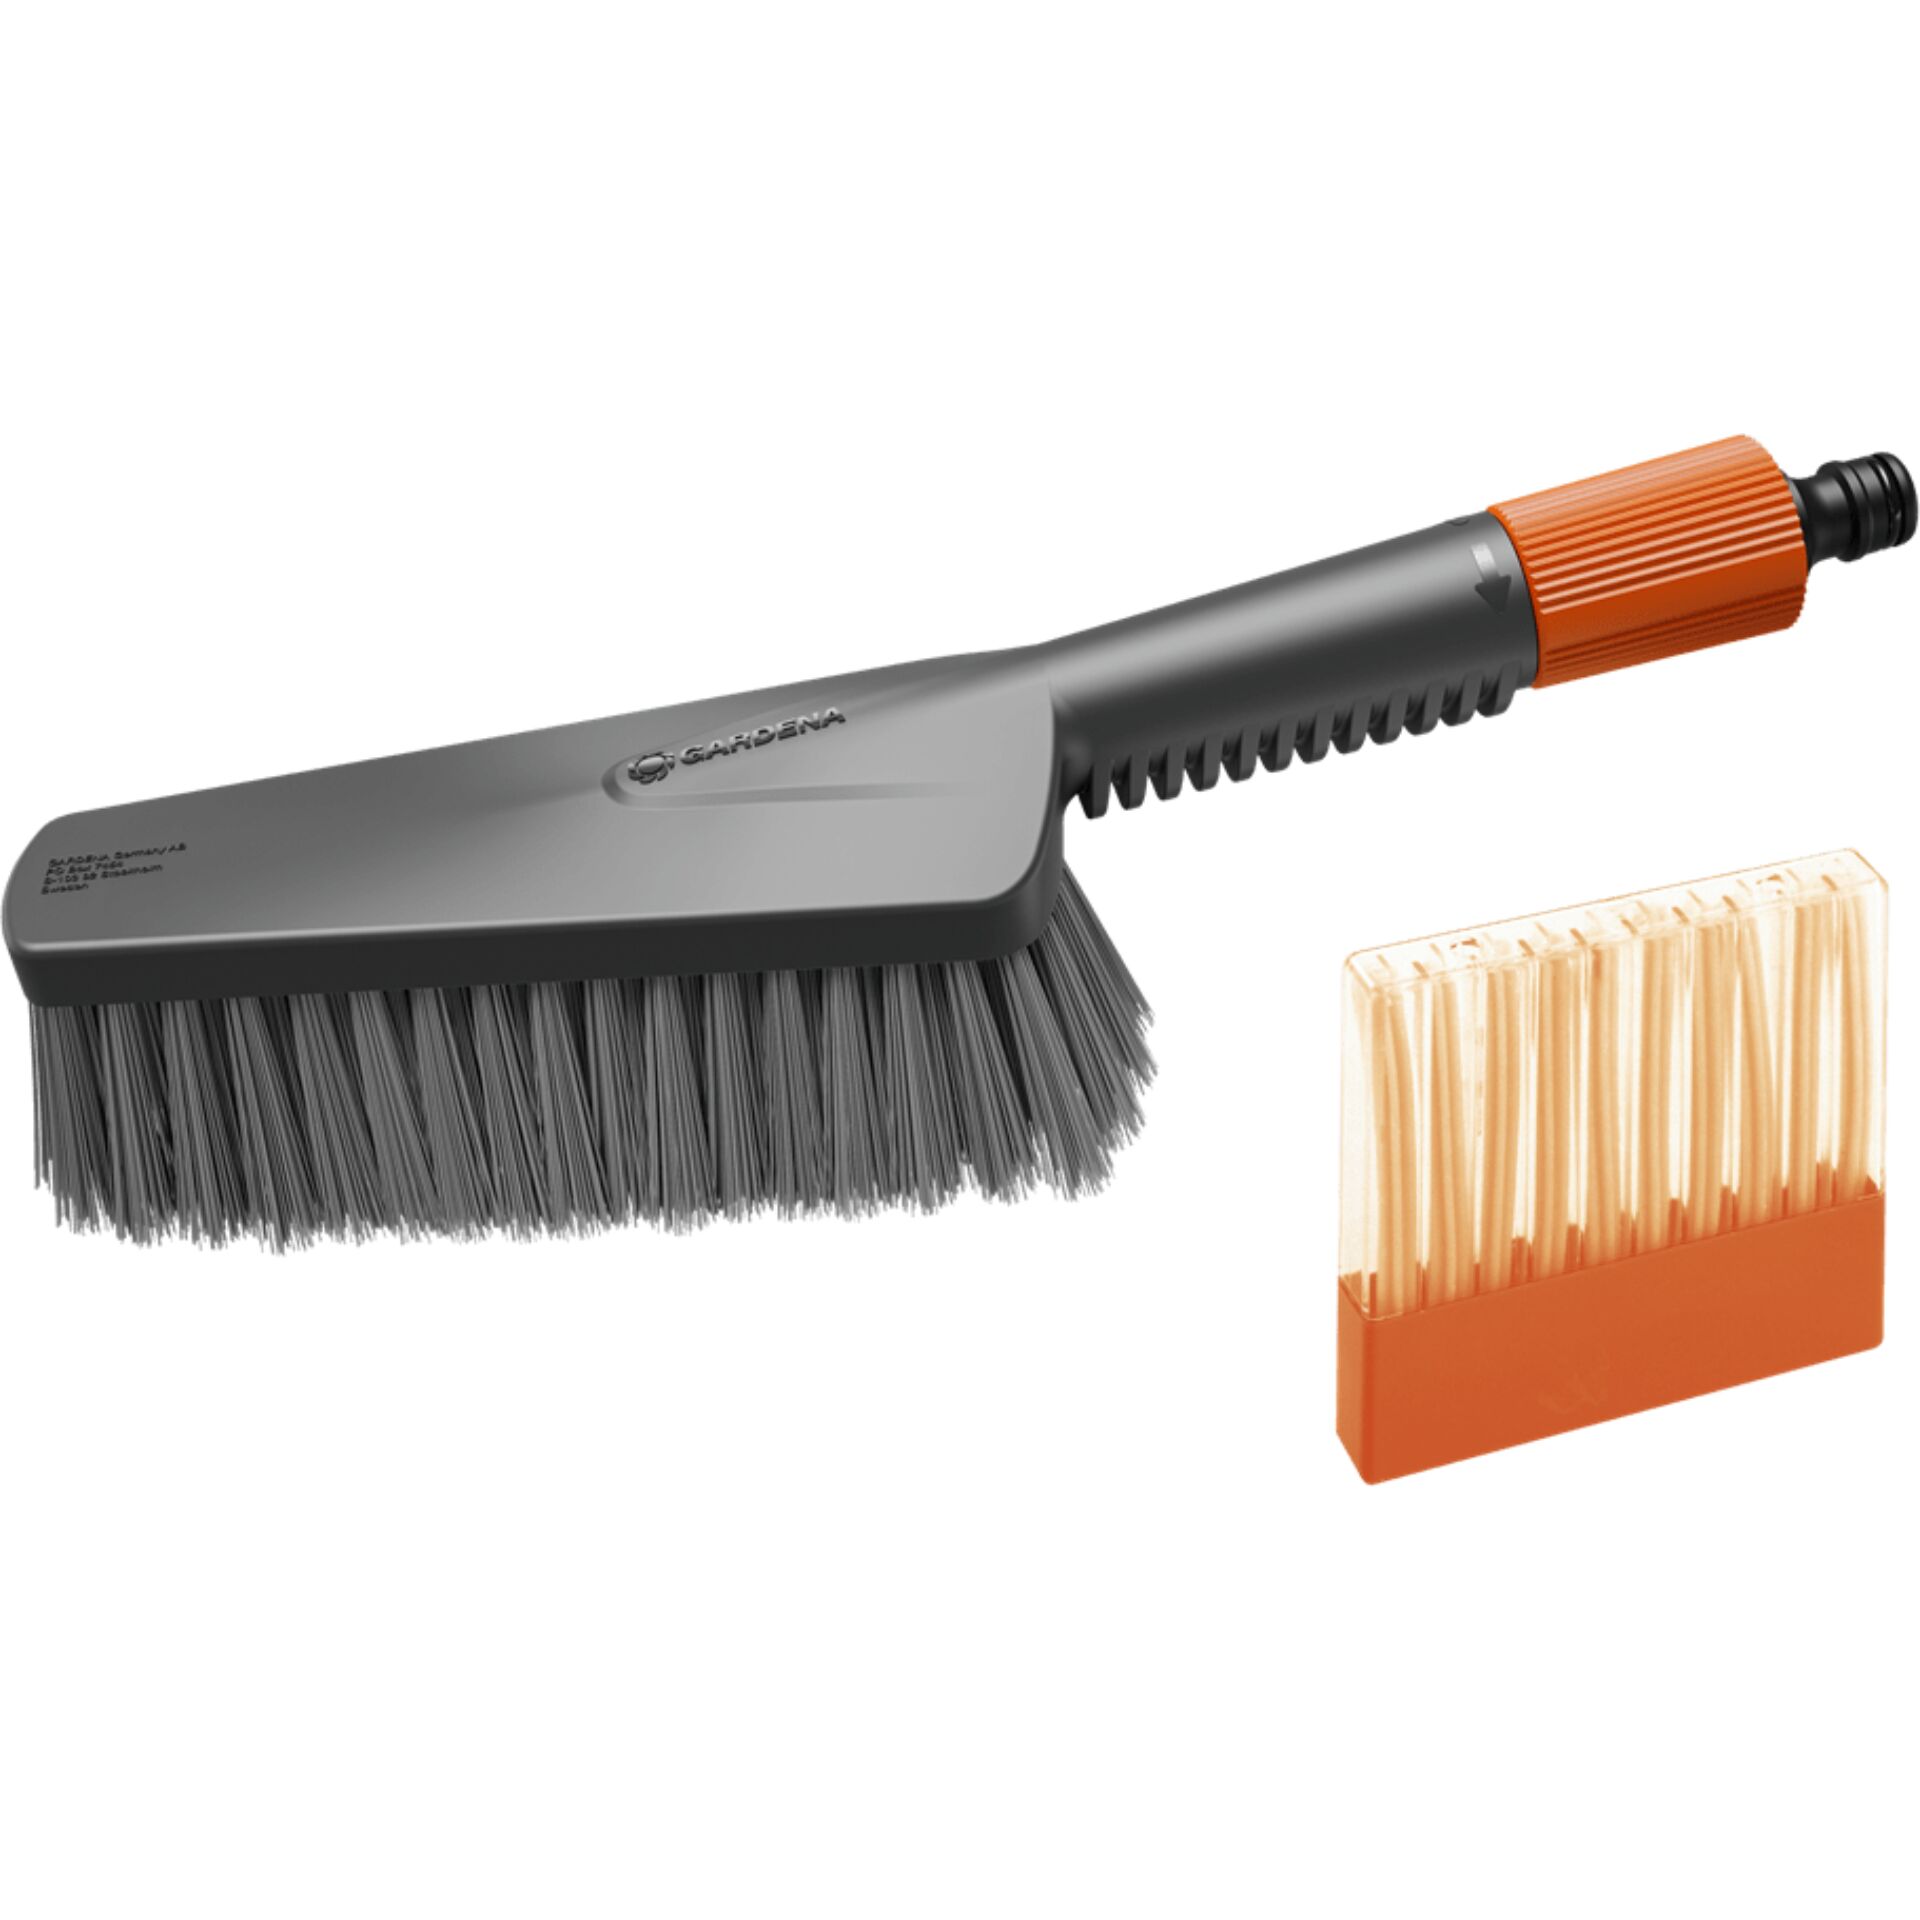 Gardena Cleansystem Cleaning Set Hand Brush M soft